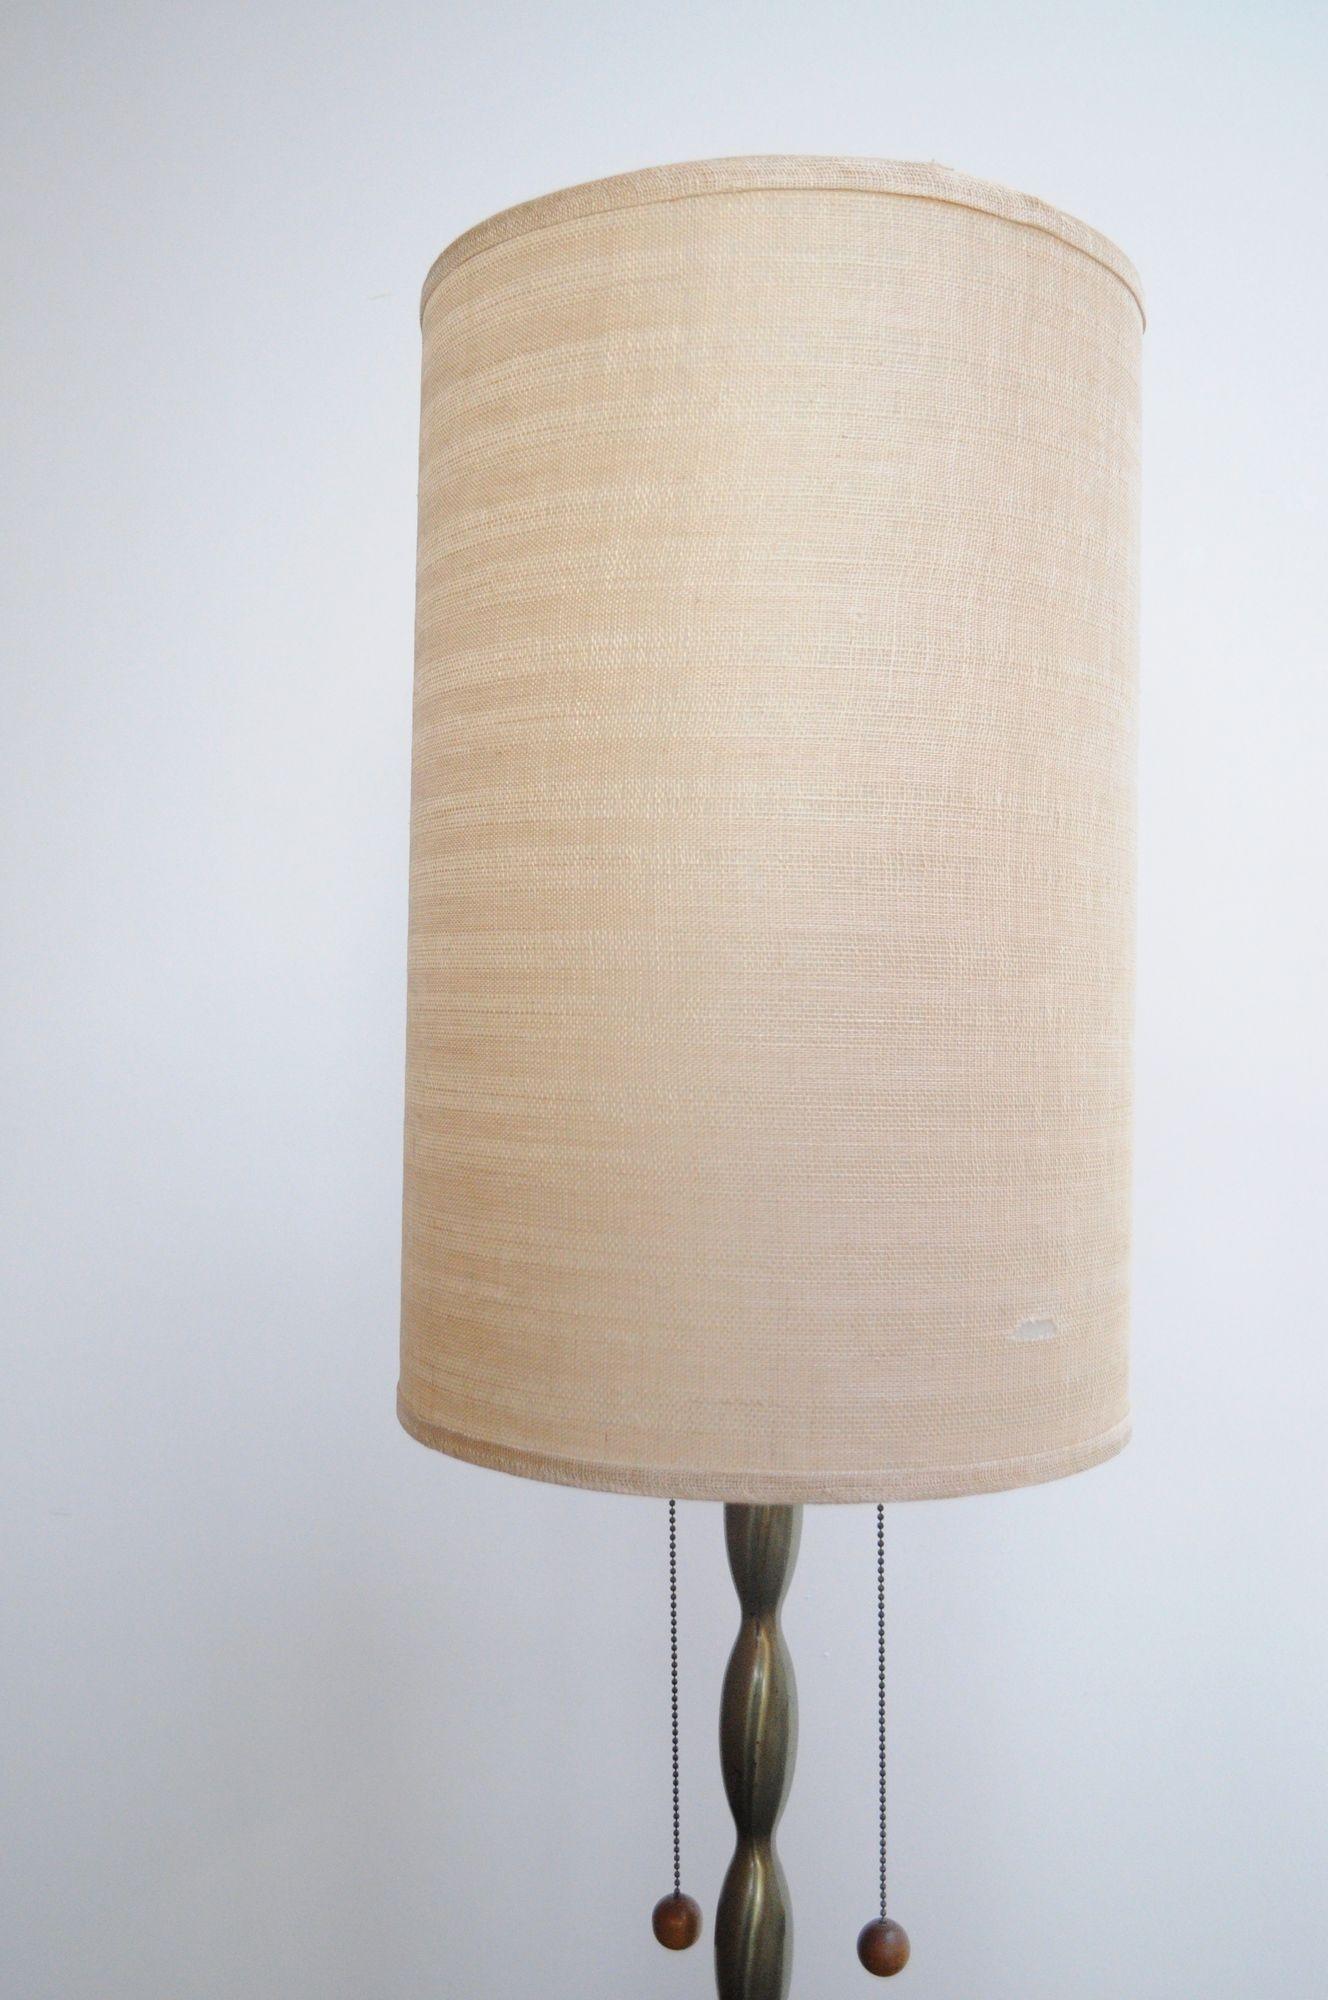 Vintage Ceramic and Brass Graduated Dual Socket Floor Lamp with Shade For Sale 6